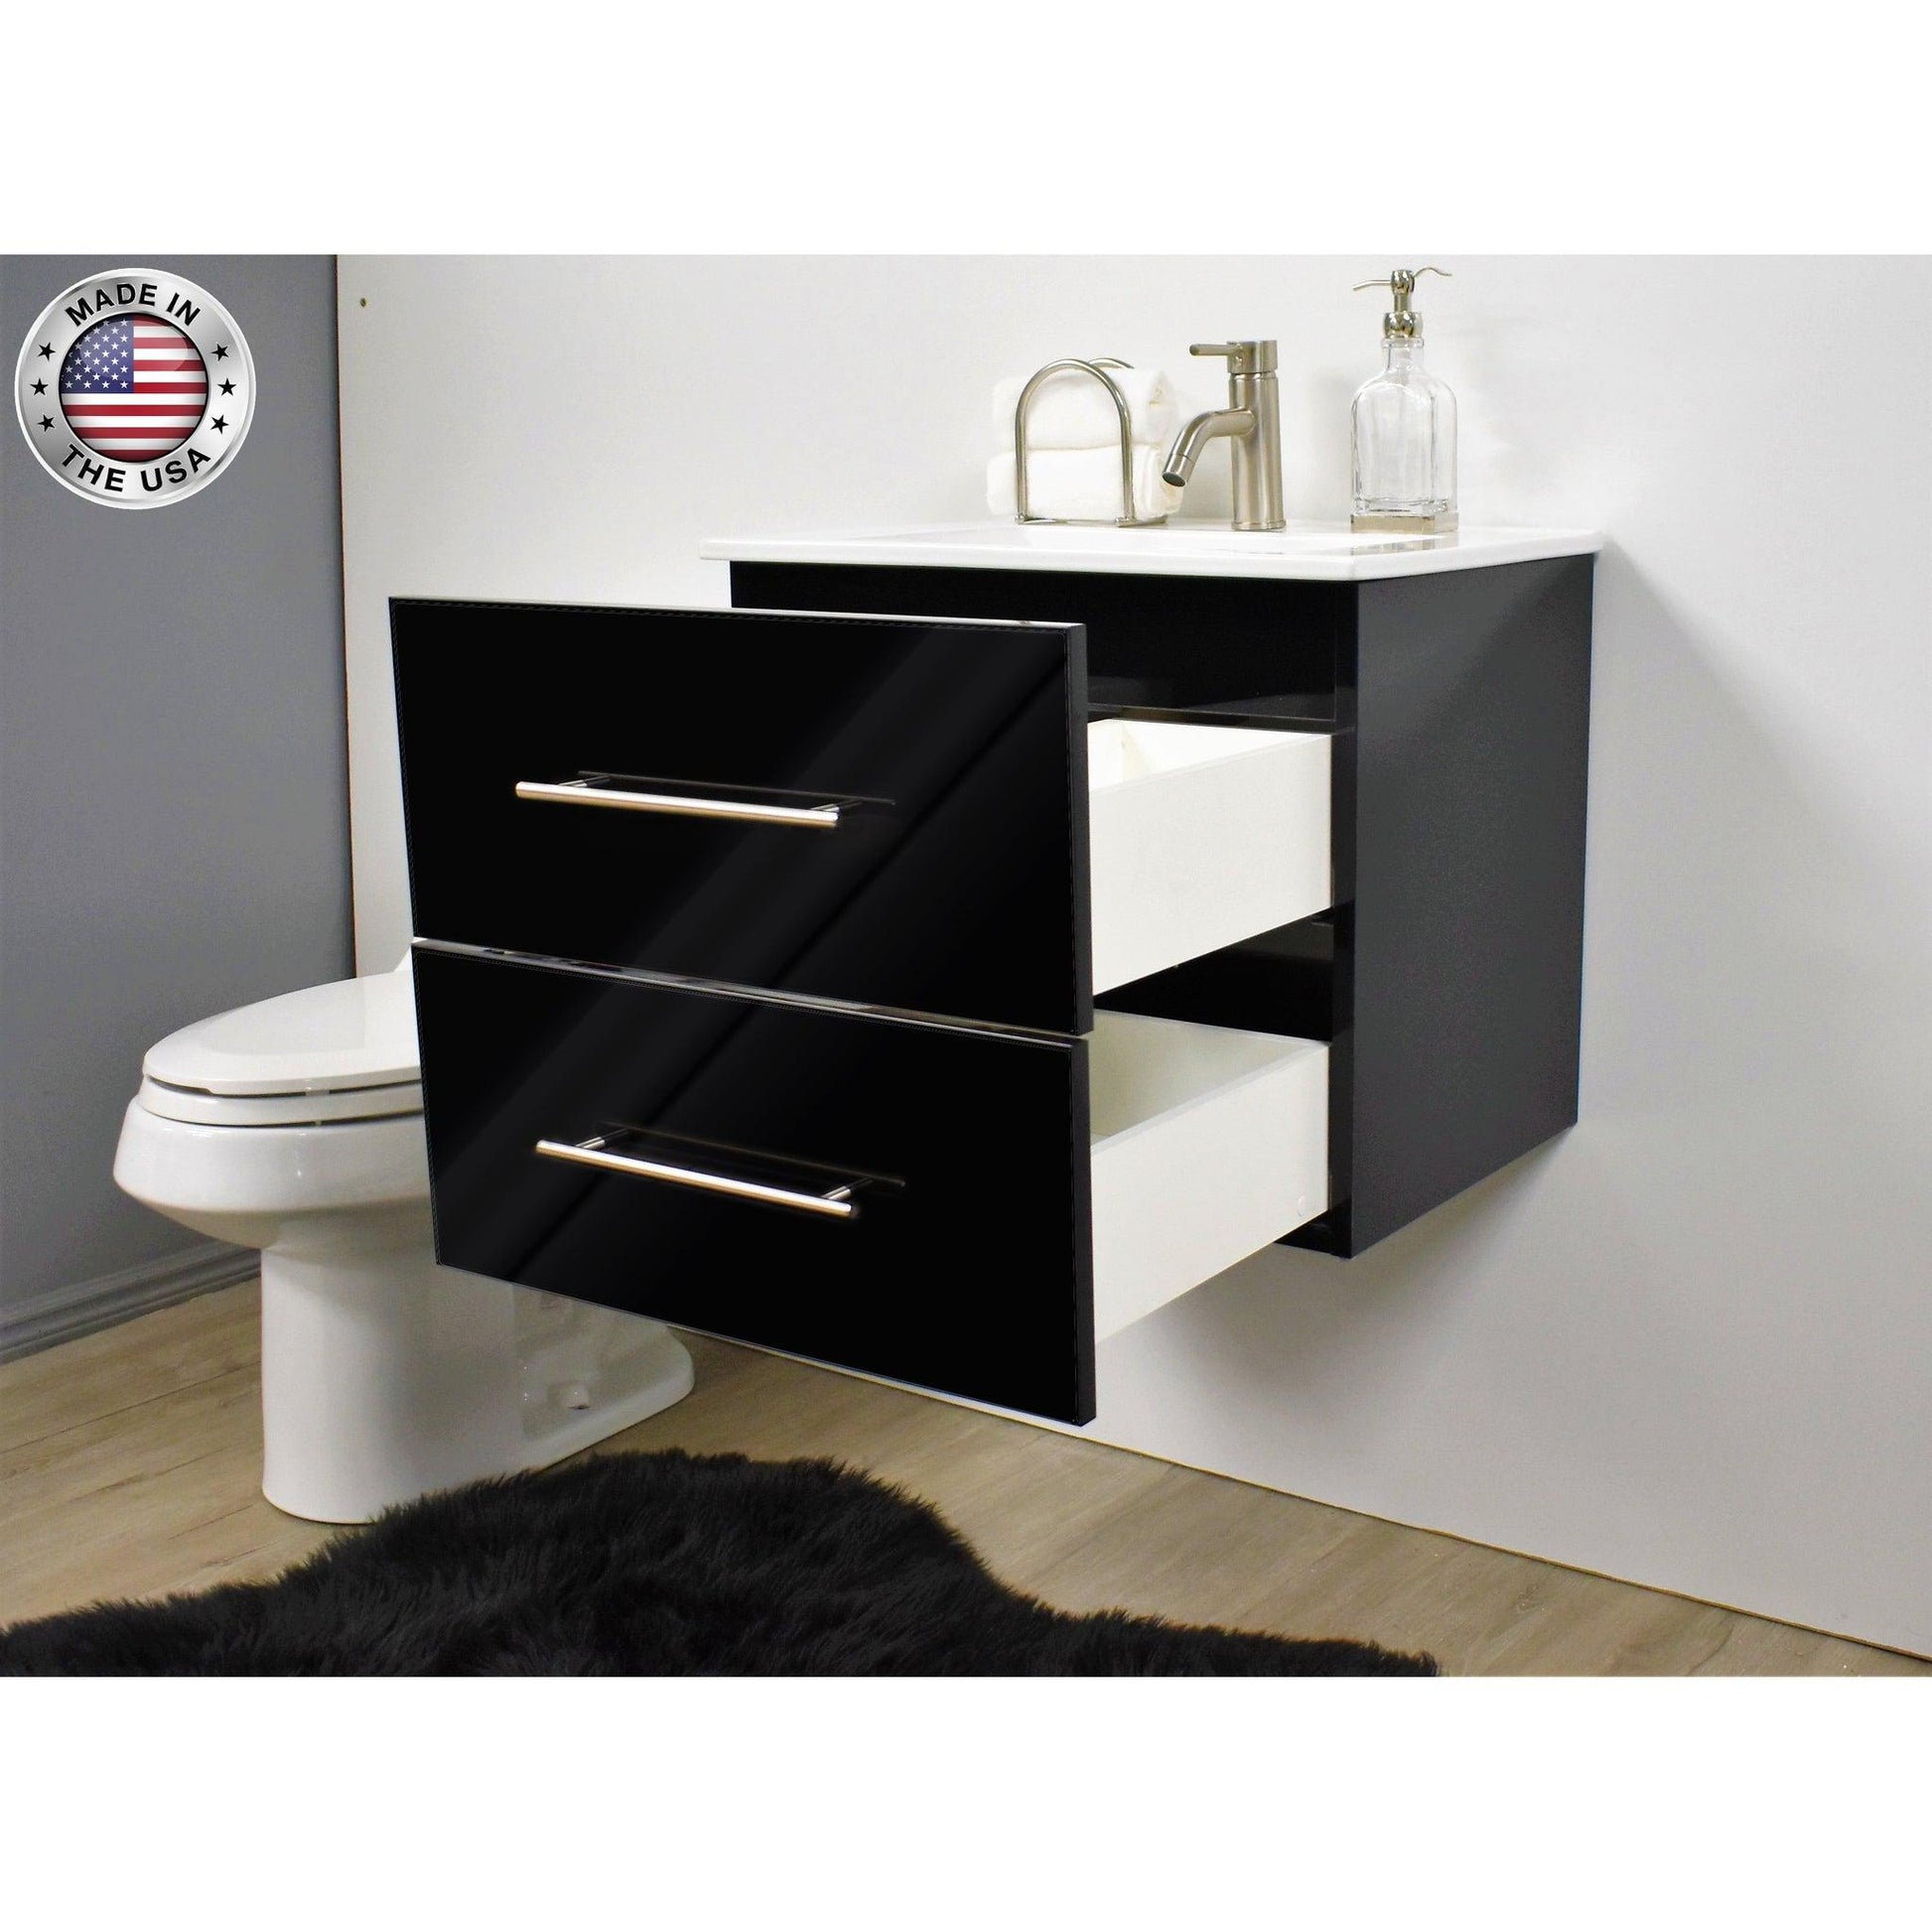 Volpa USA Napa 30" Glossy Black Wall-Mounted Floating Modern Bathroom Vanity With Integrated Ceramic Top and Satin Nickel Round Handles